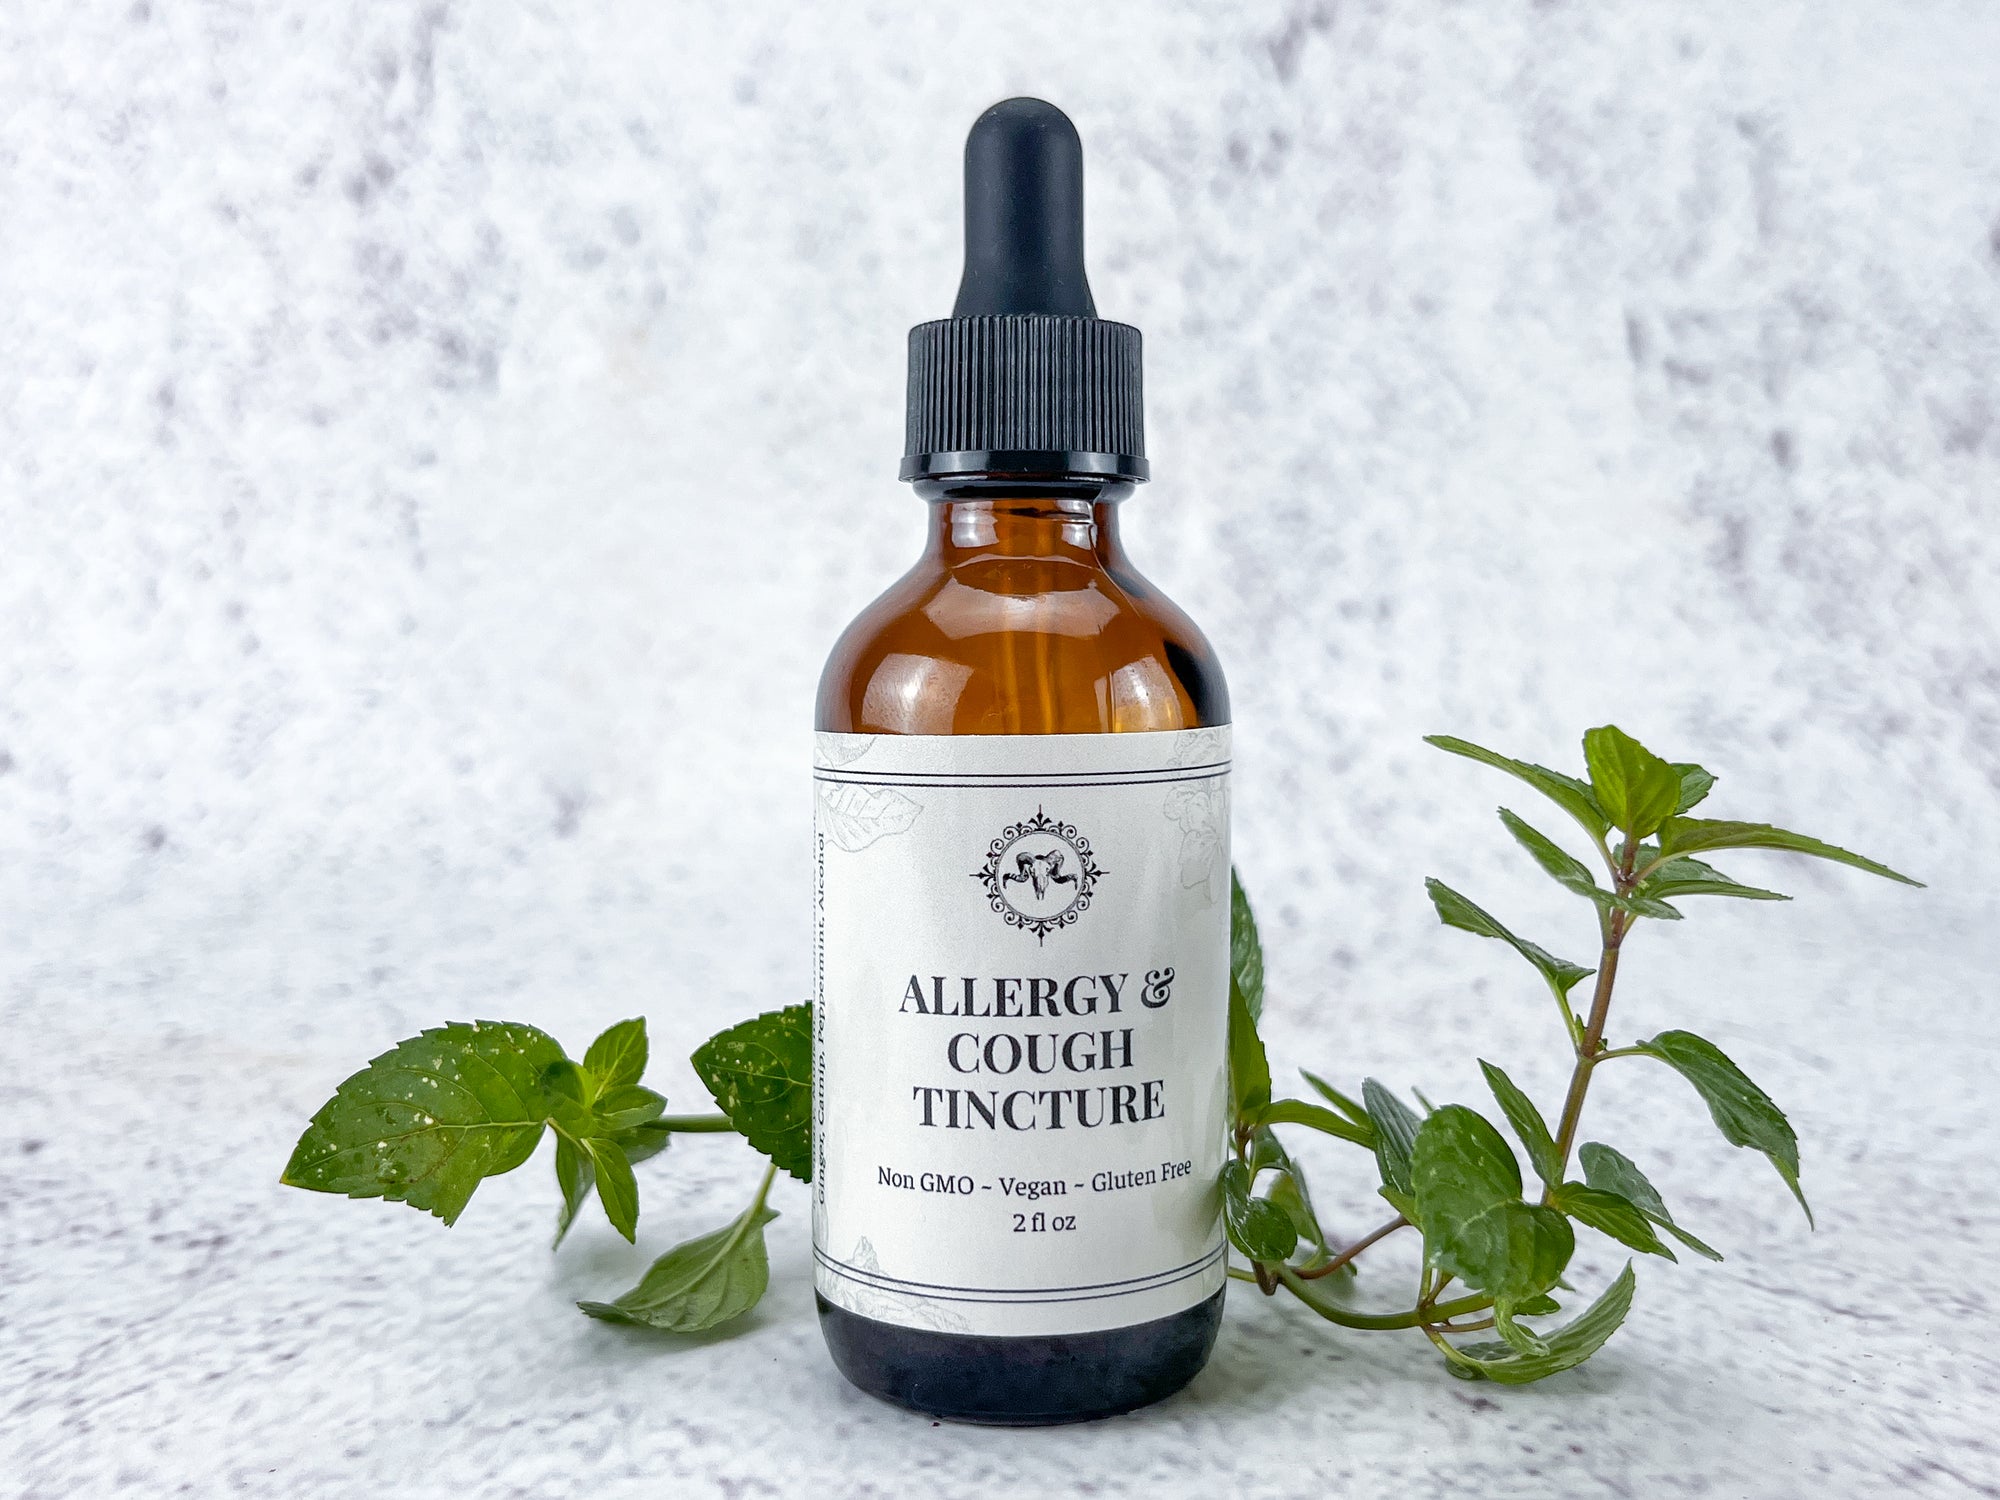 Allergy and Cough Tincture